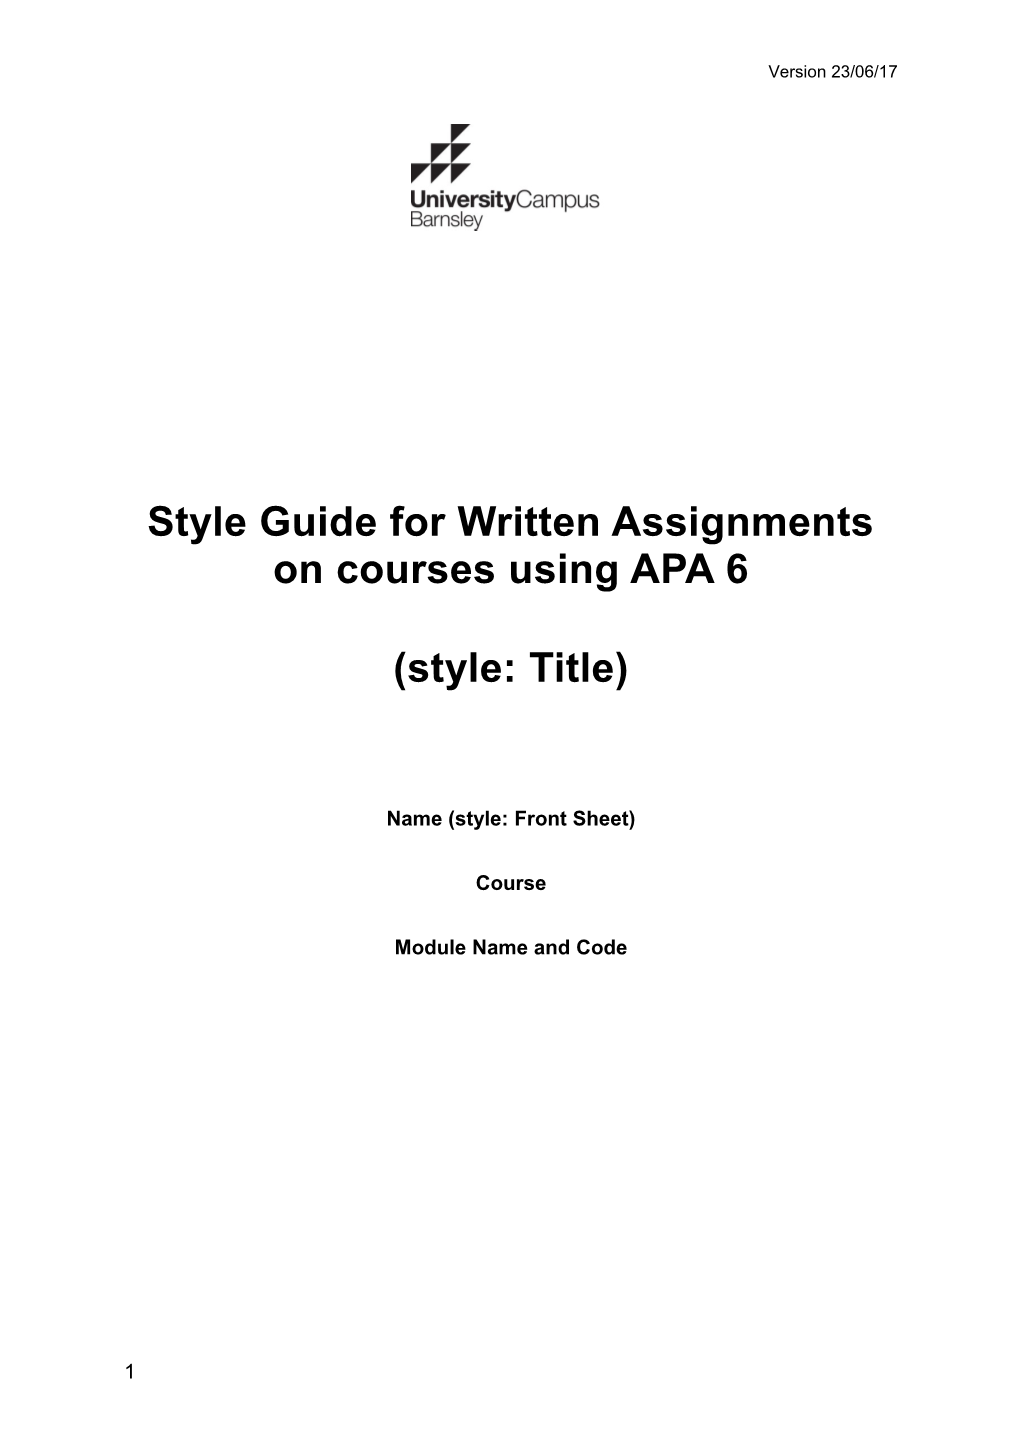 Style Guide for Written Assignments on Courses Using APA 6